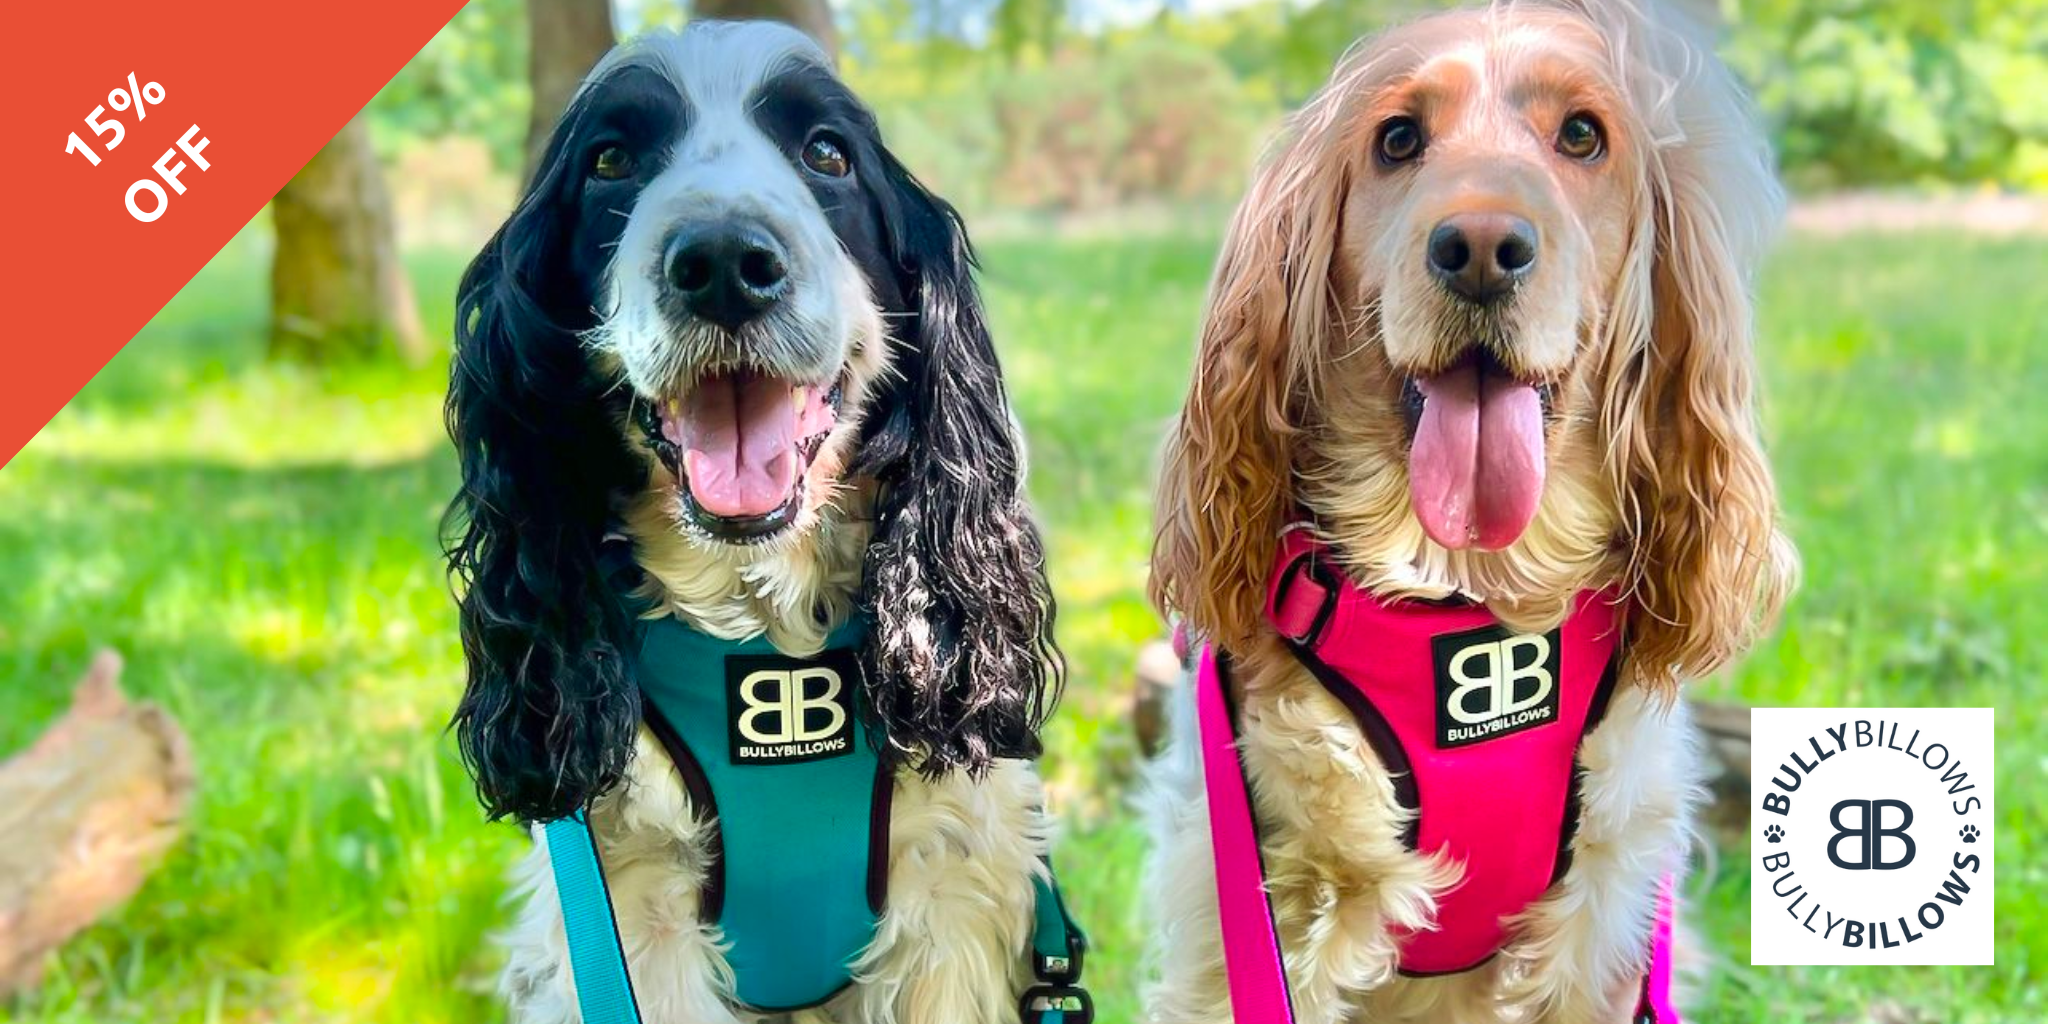 Two dogs wearing BullyBillows harnesses and leads.